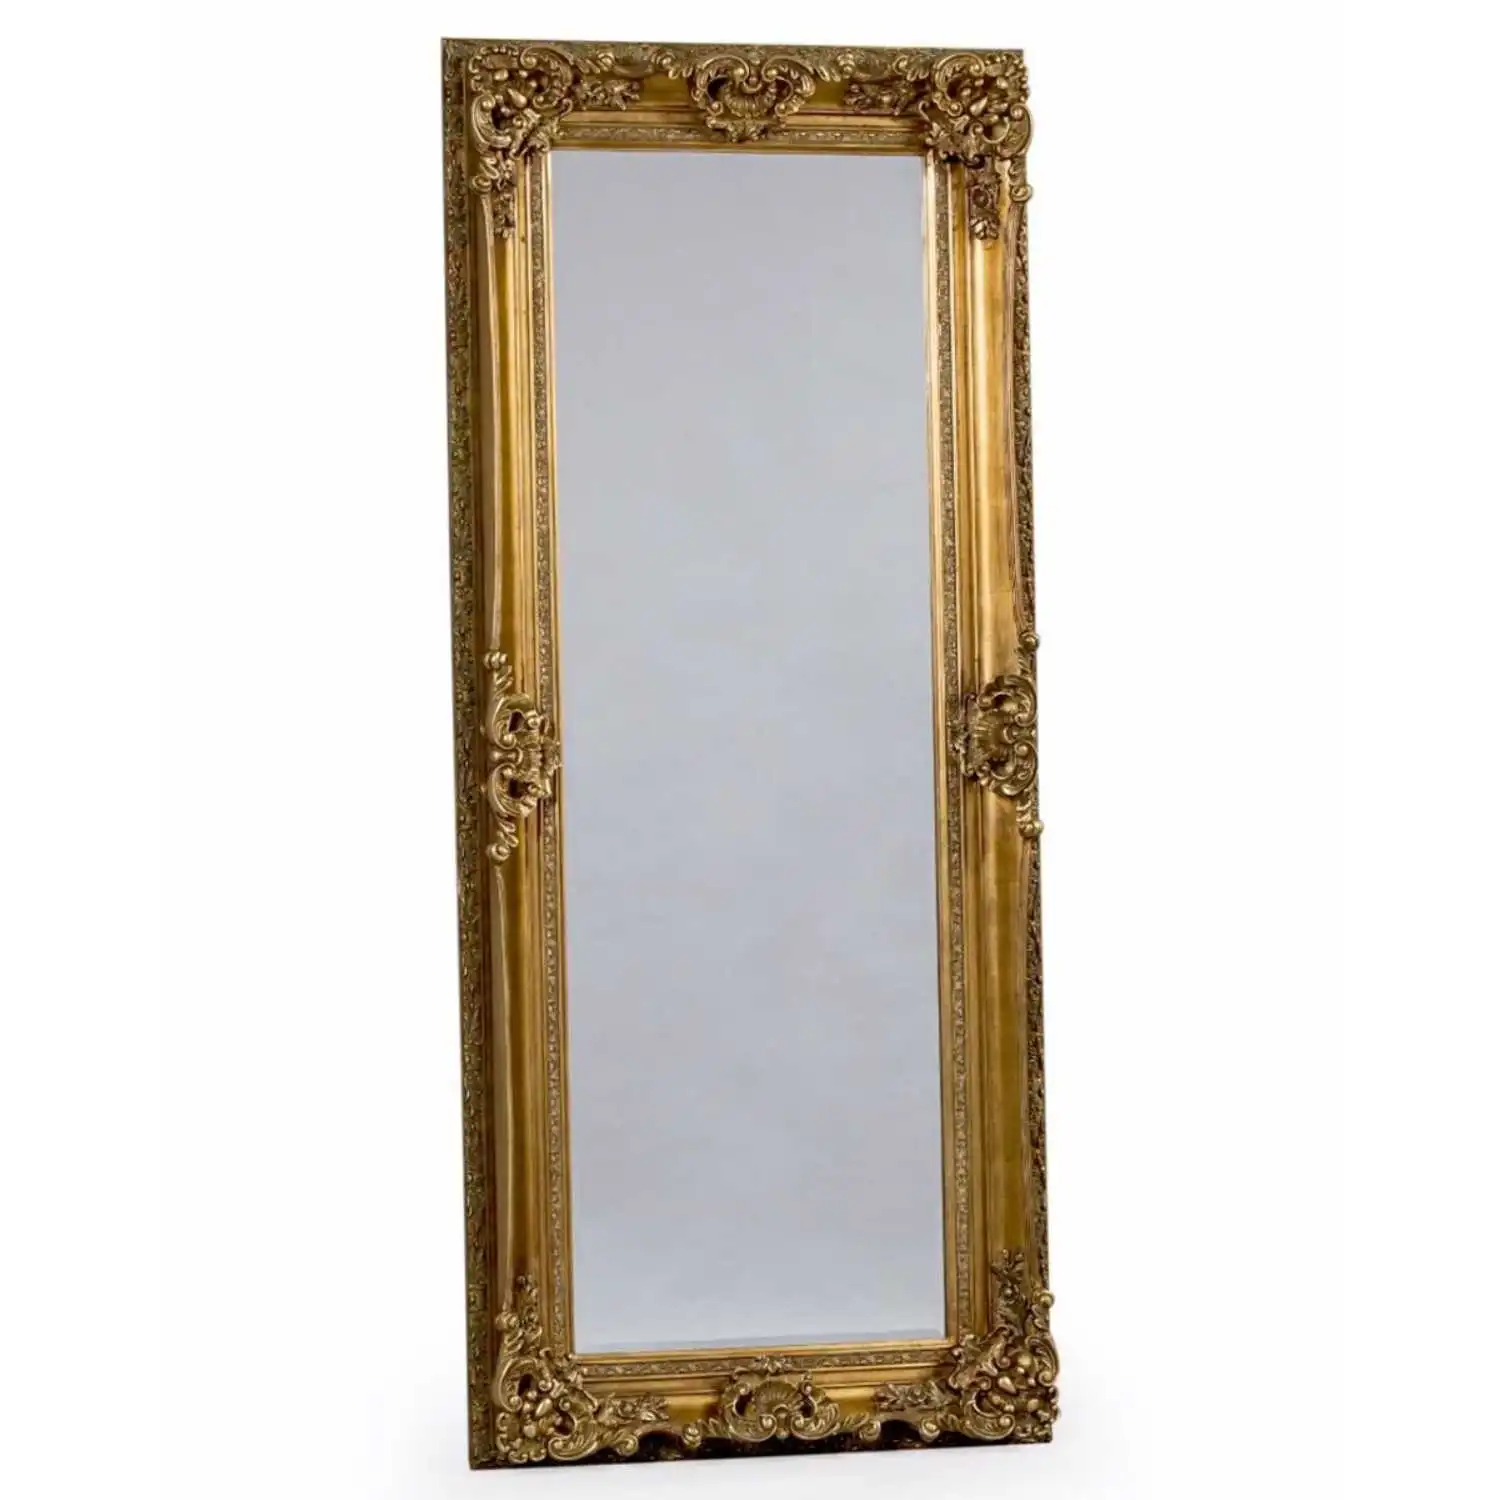 Gold Tall Wall Mirror with Ornate Carved Frame